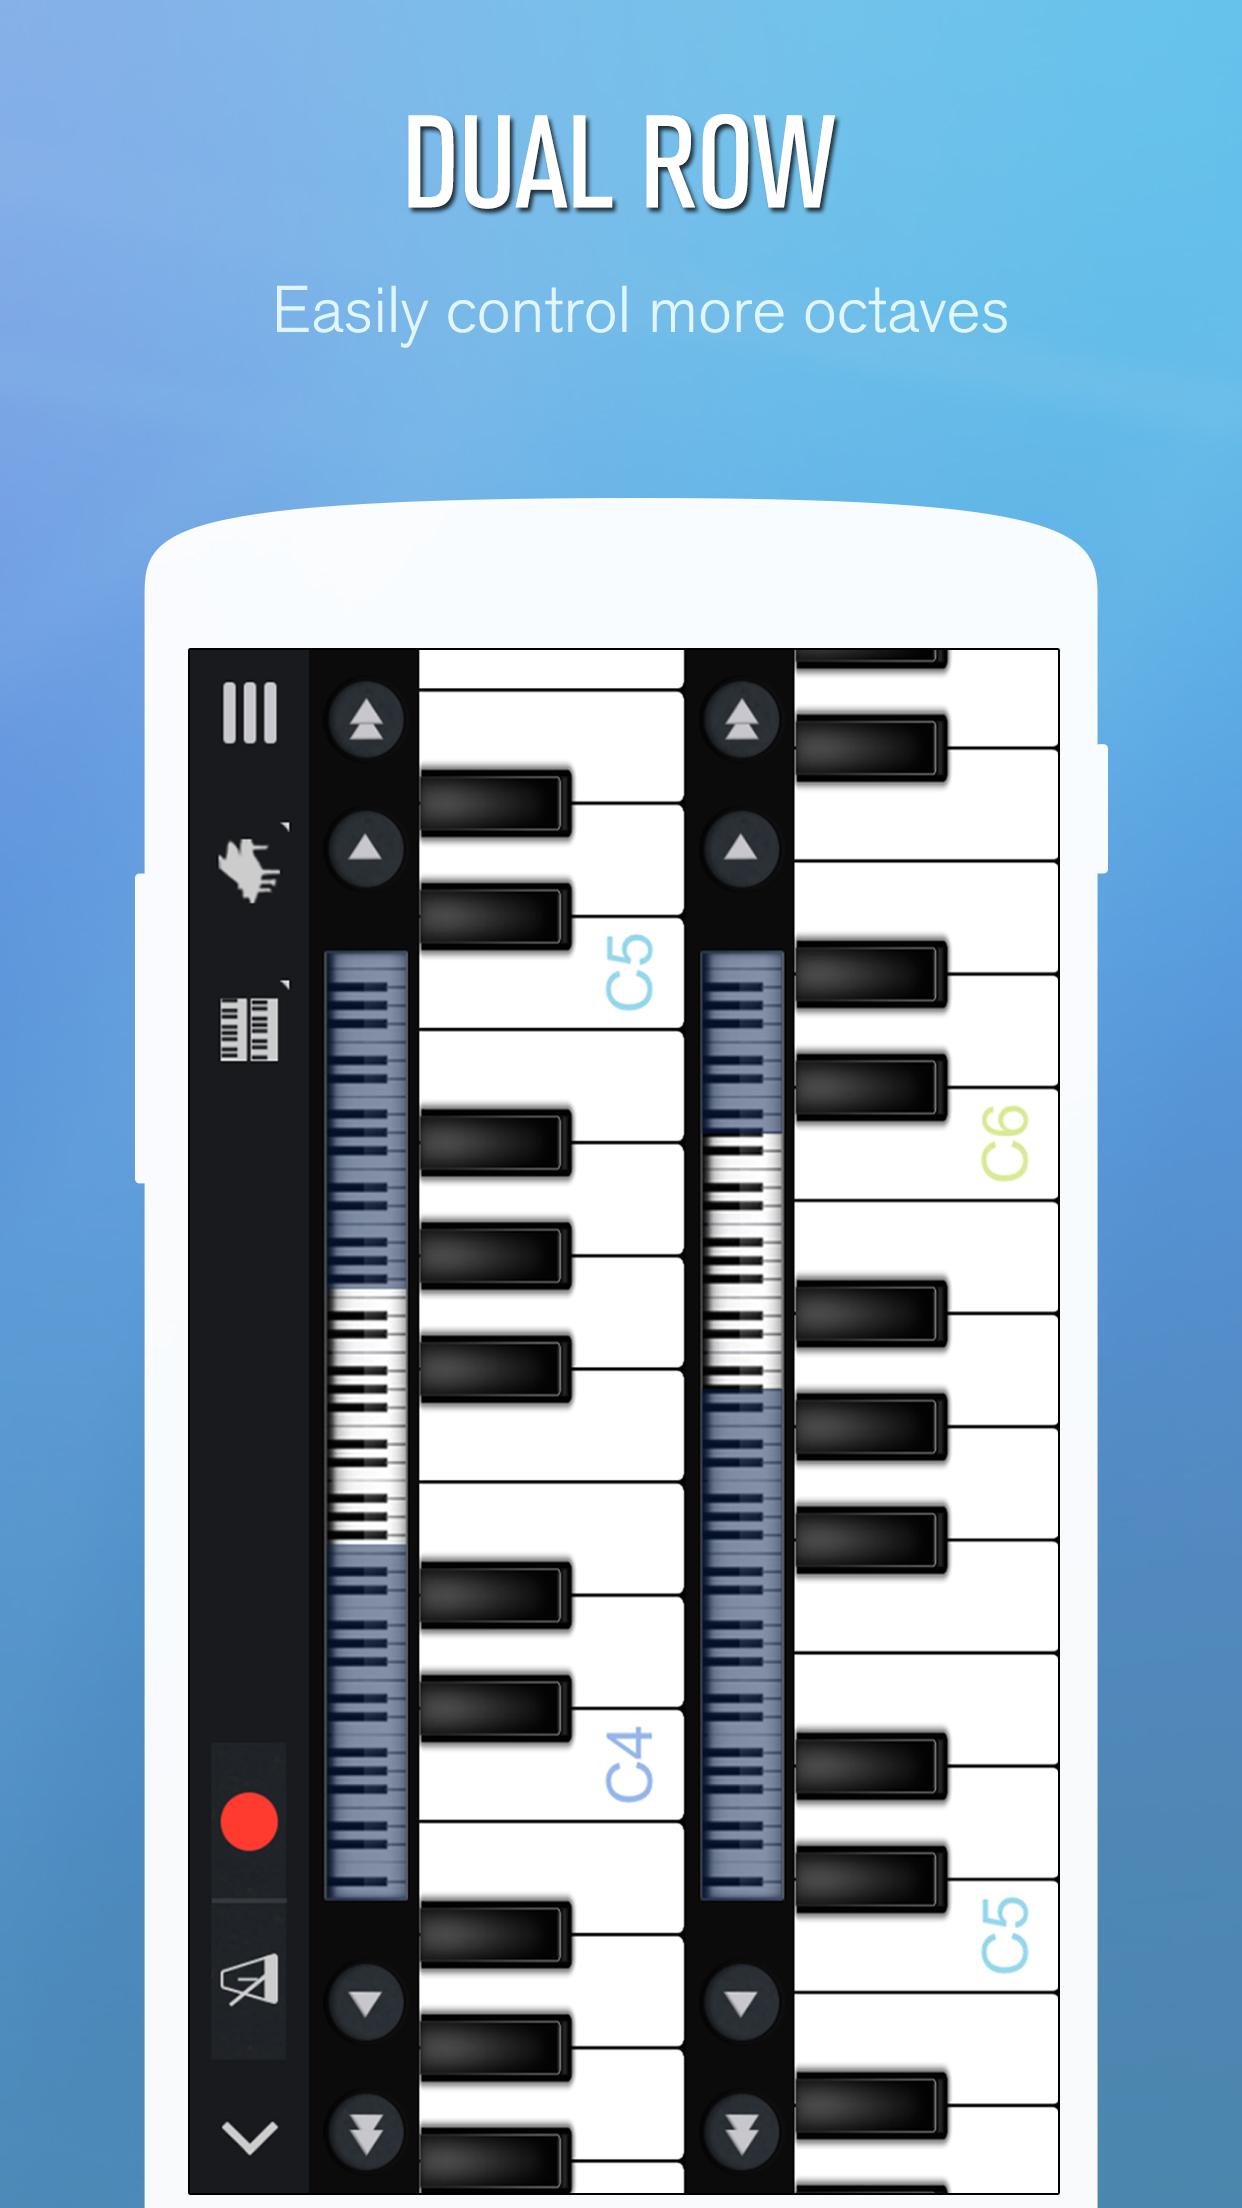 Perfect Piano APK for Android Download